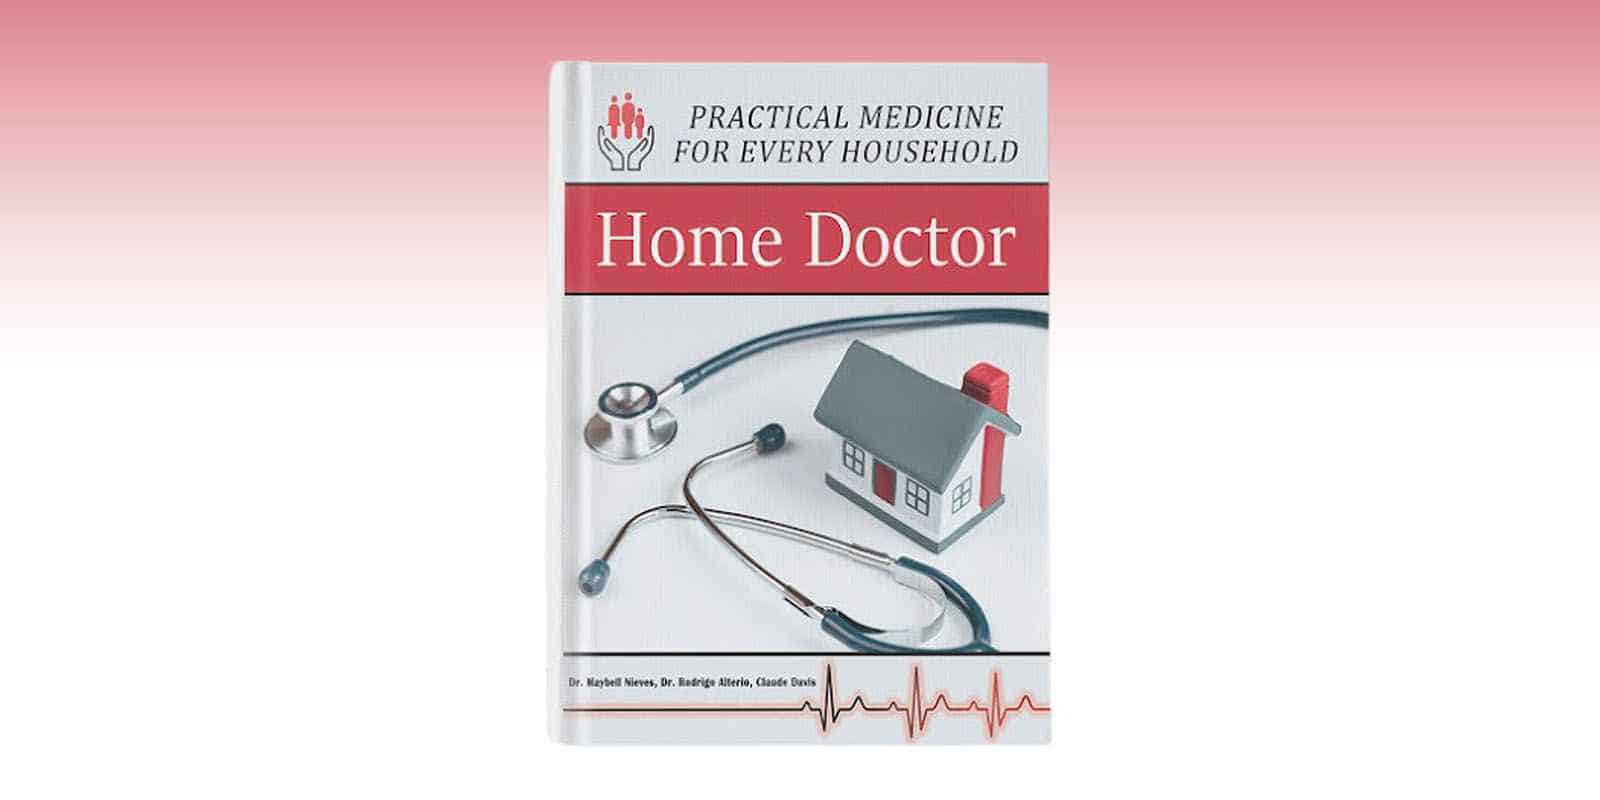 The Home Doctor Guide Reviews